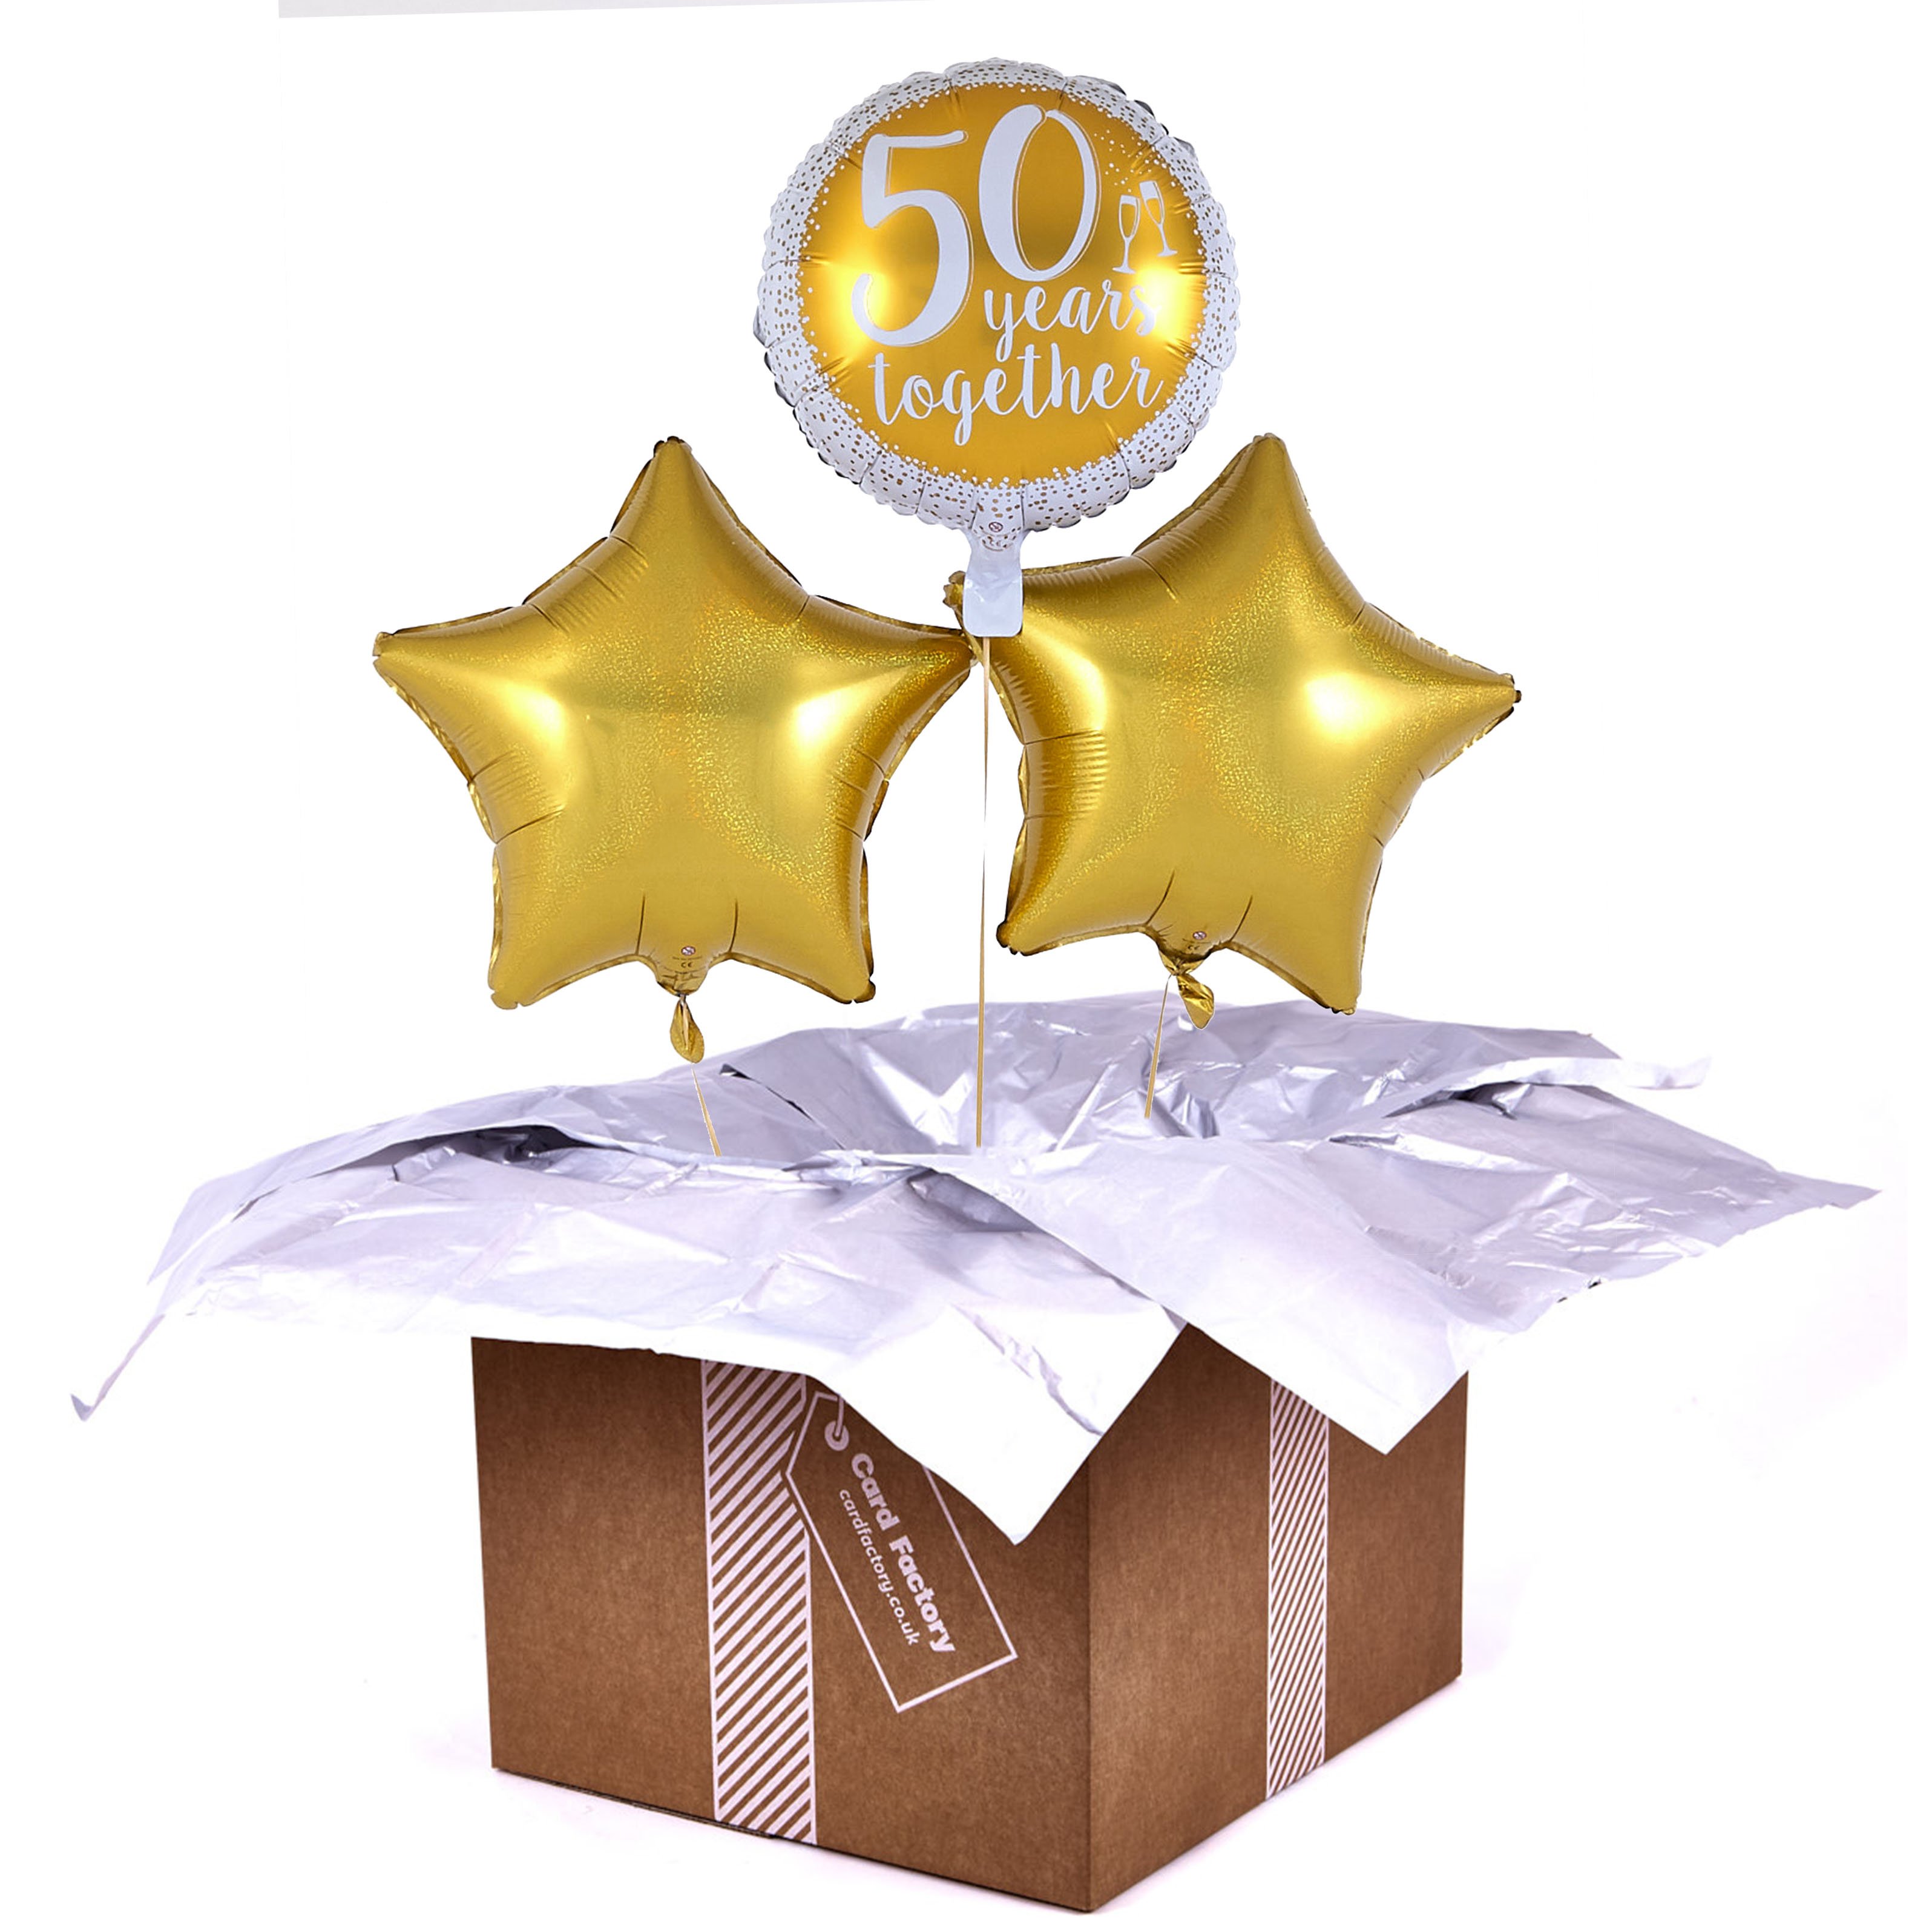 50 Years Together' Golden Wedding Balloon Bouquet - DELIVERED INFLATED!